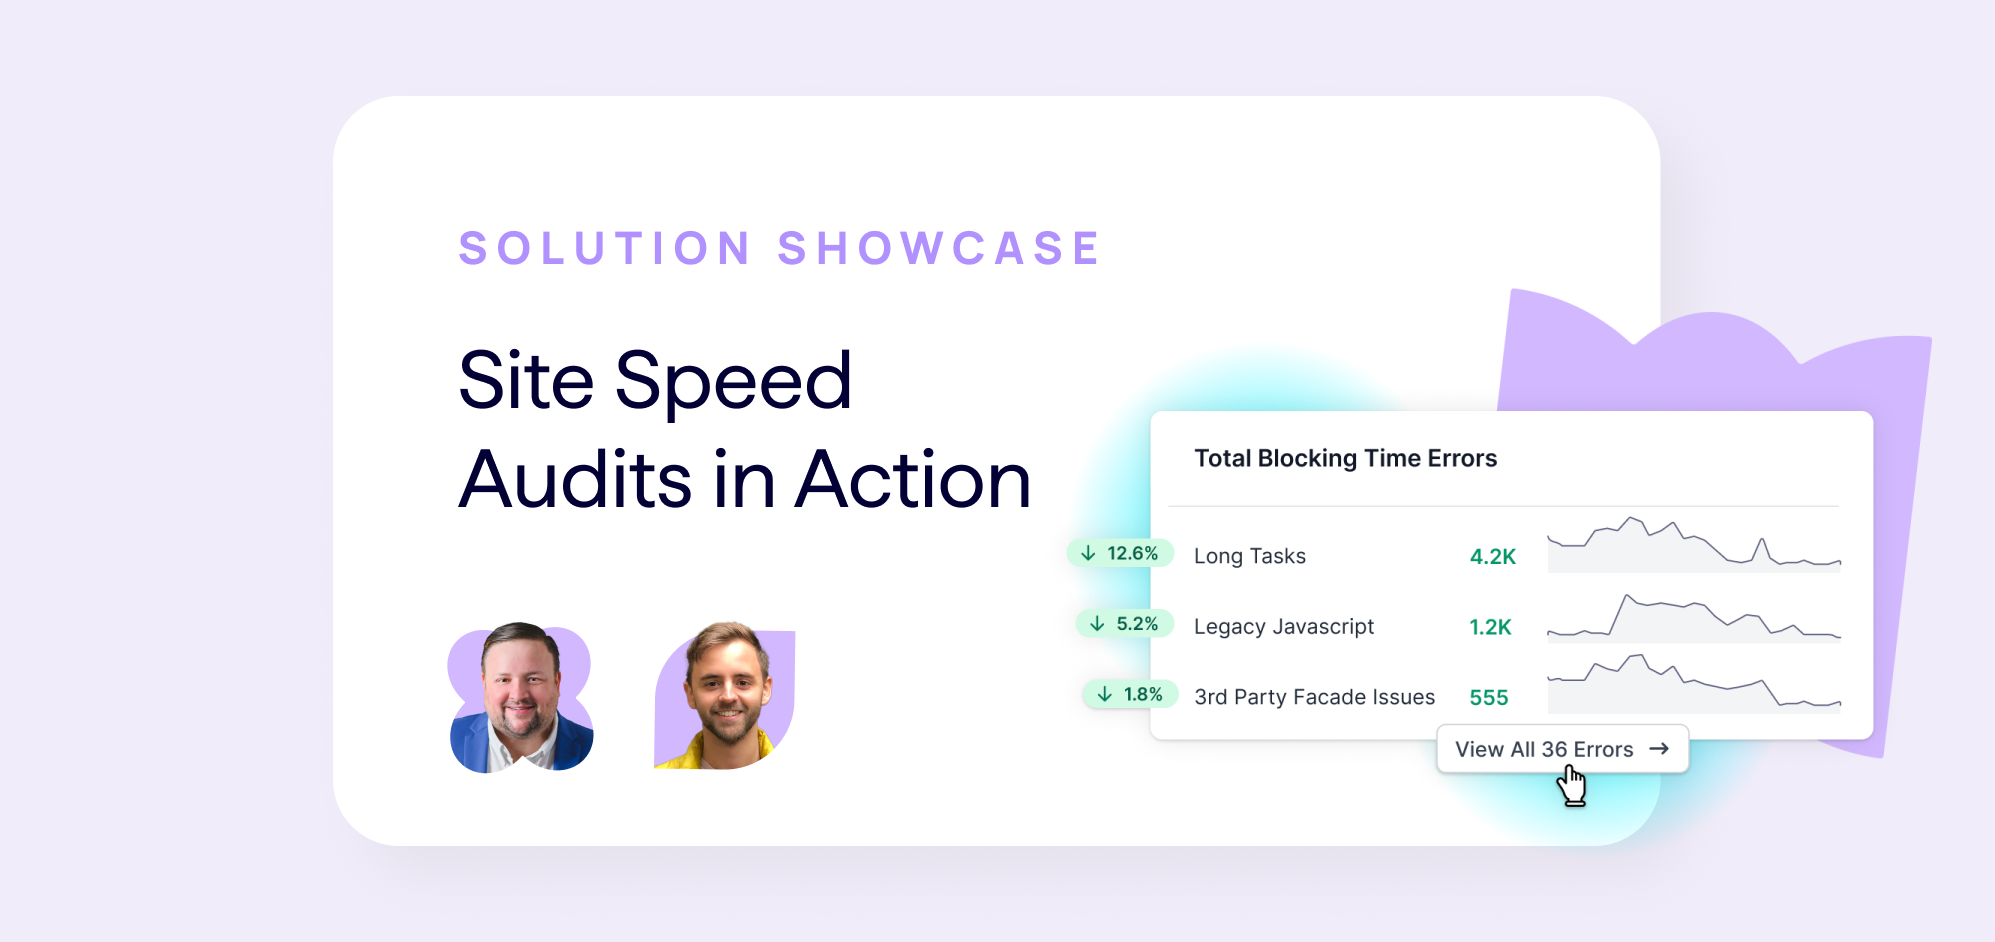 Lumar SEO Webinar - Solutions Showcase - Site Speed Audits in Action - Banner shows photos of webinar speakers and site speed metrics example